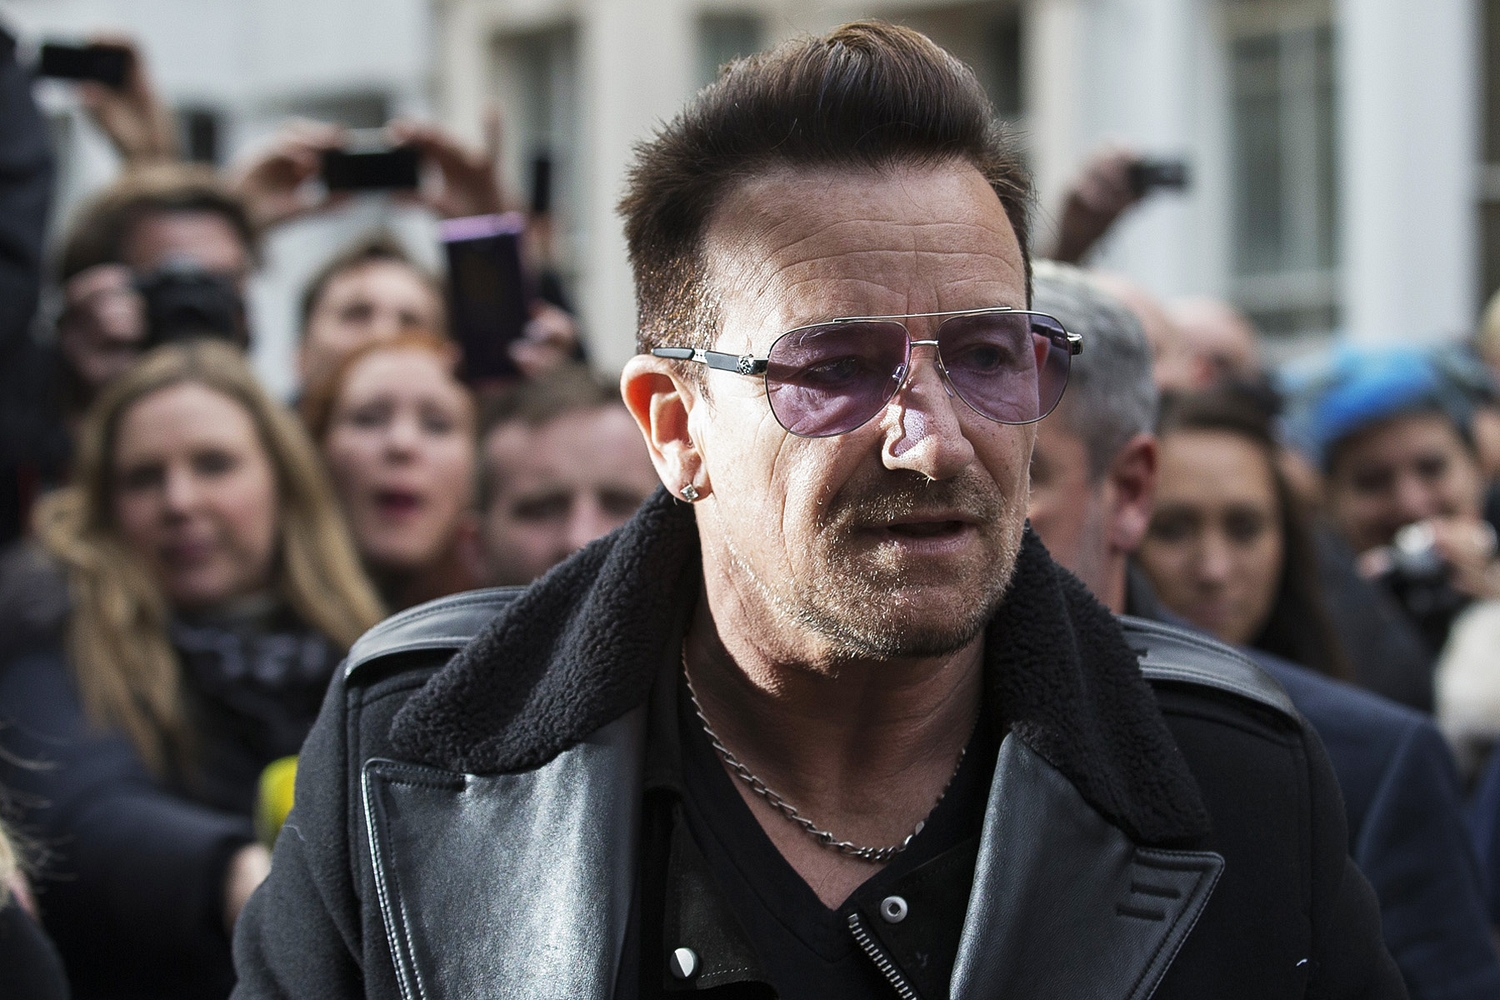 Bono claims comedians could help win the fight against the Islamic State